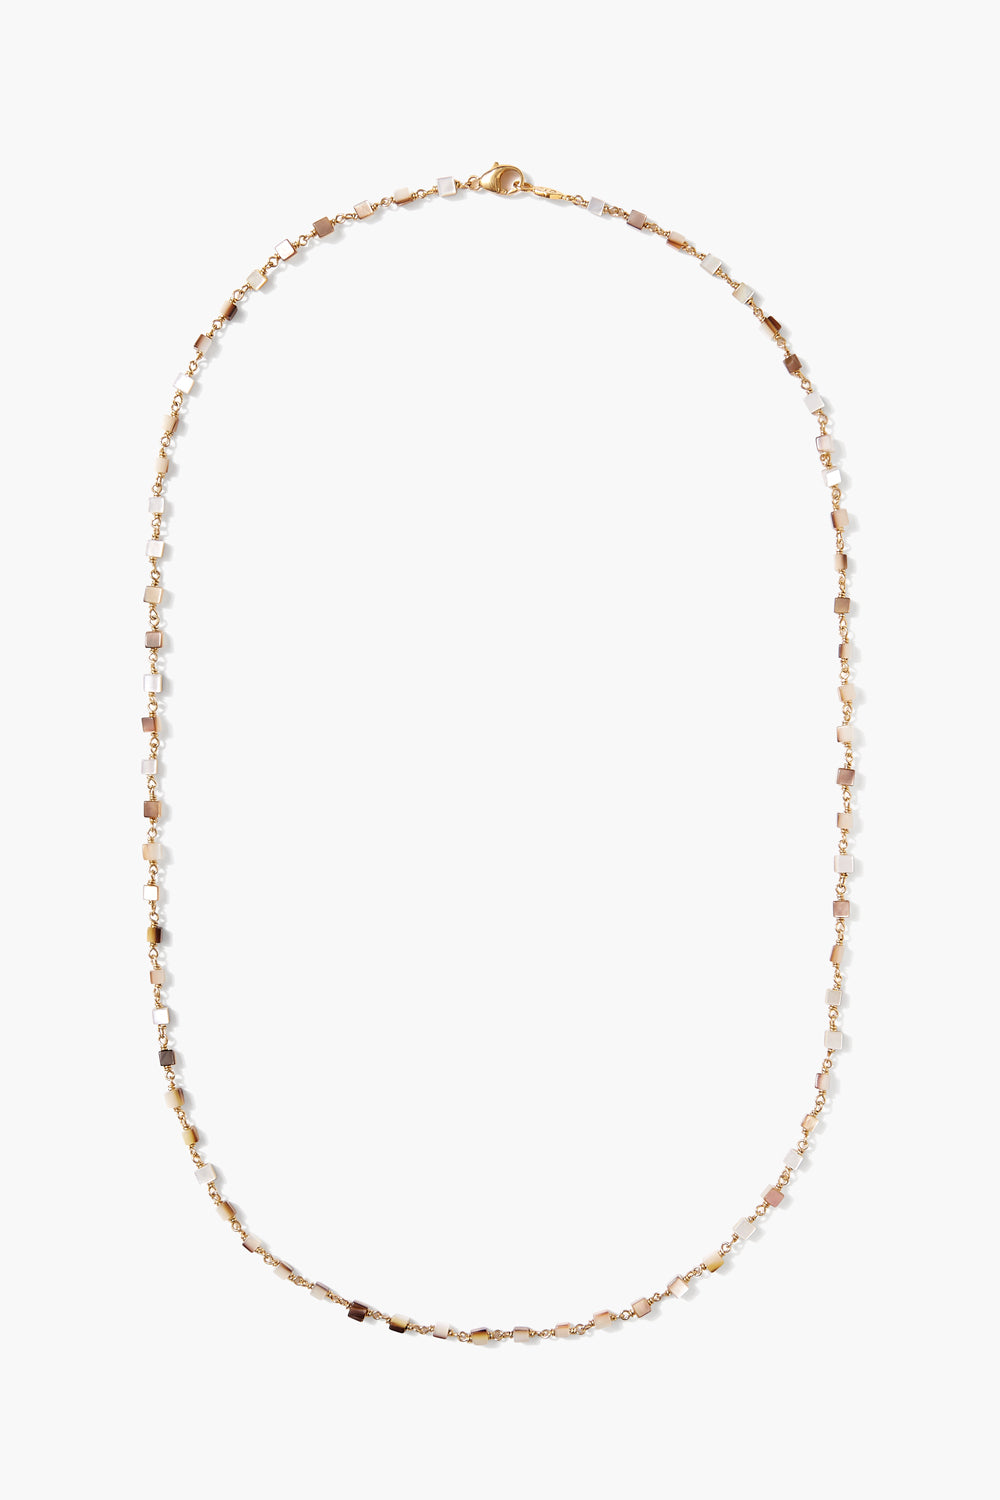 Chan Luu | Drift Necklace Black Mother of Pearl